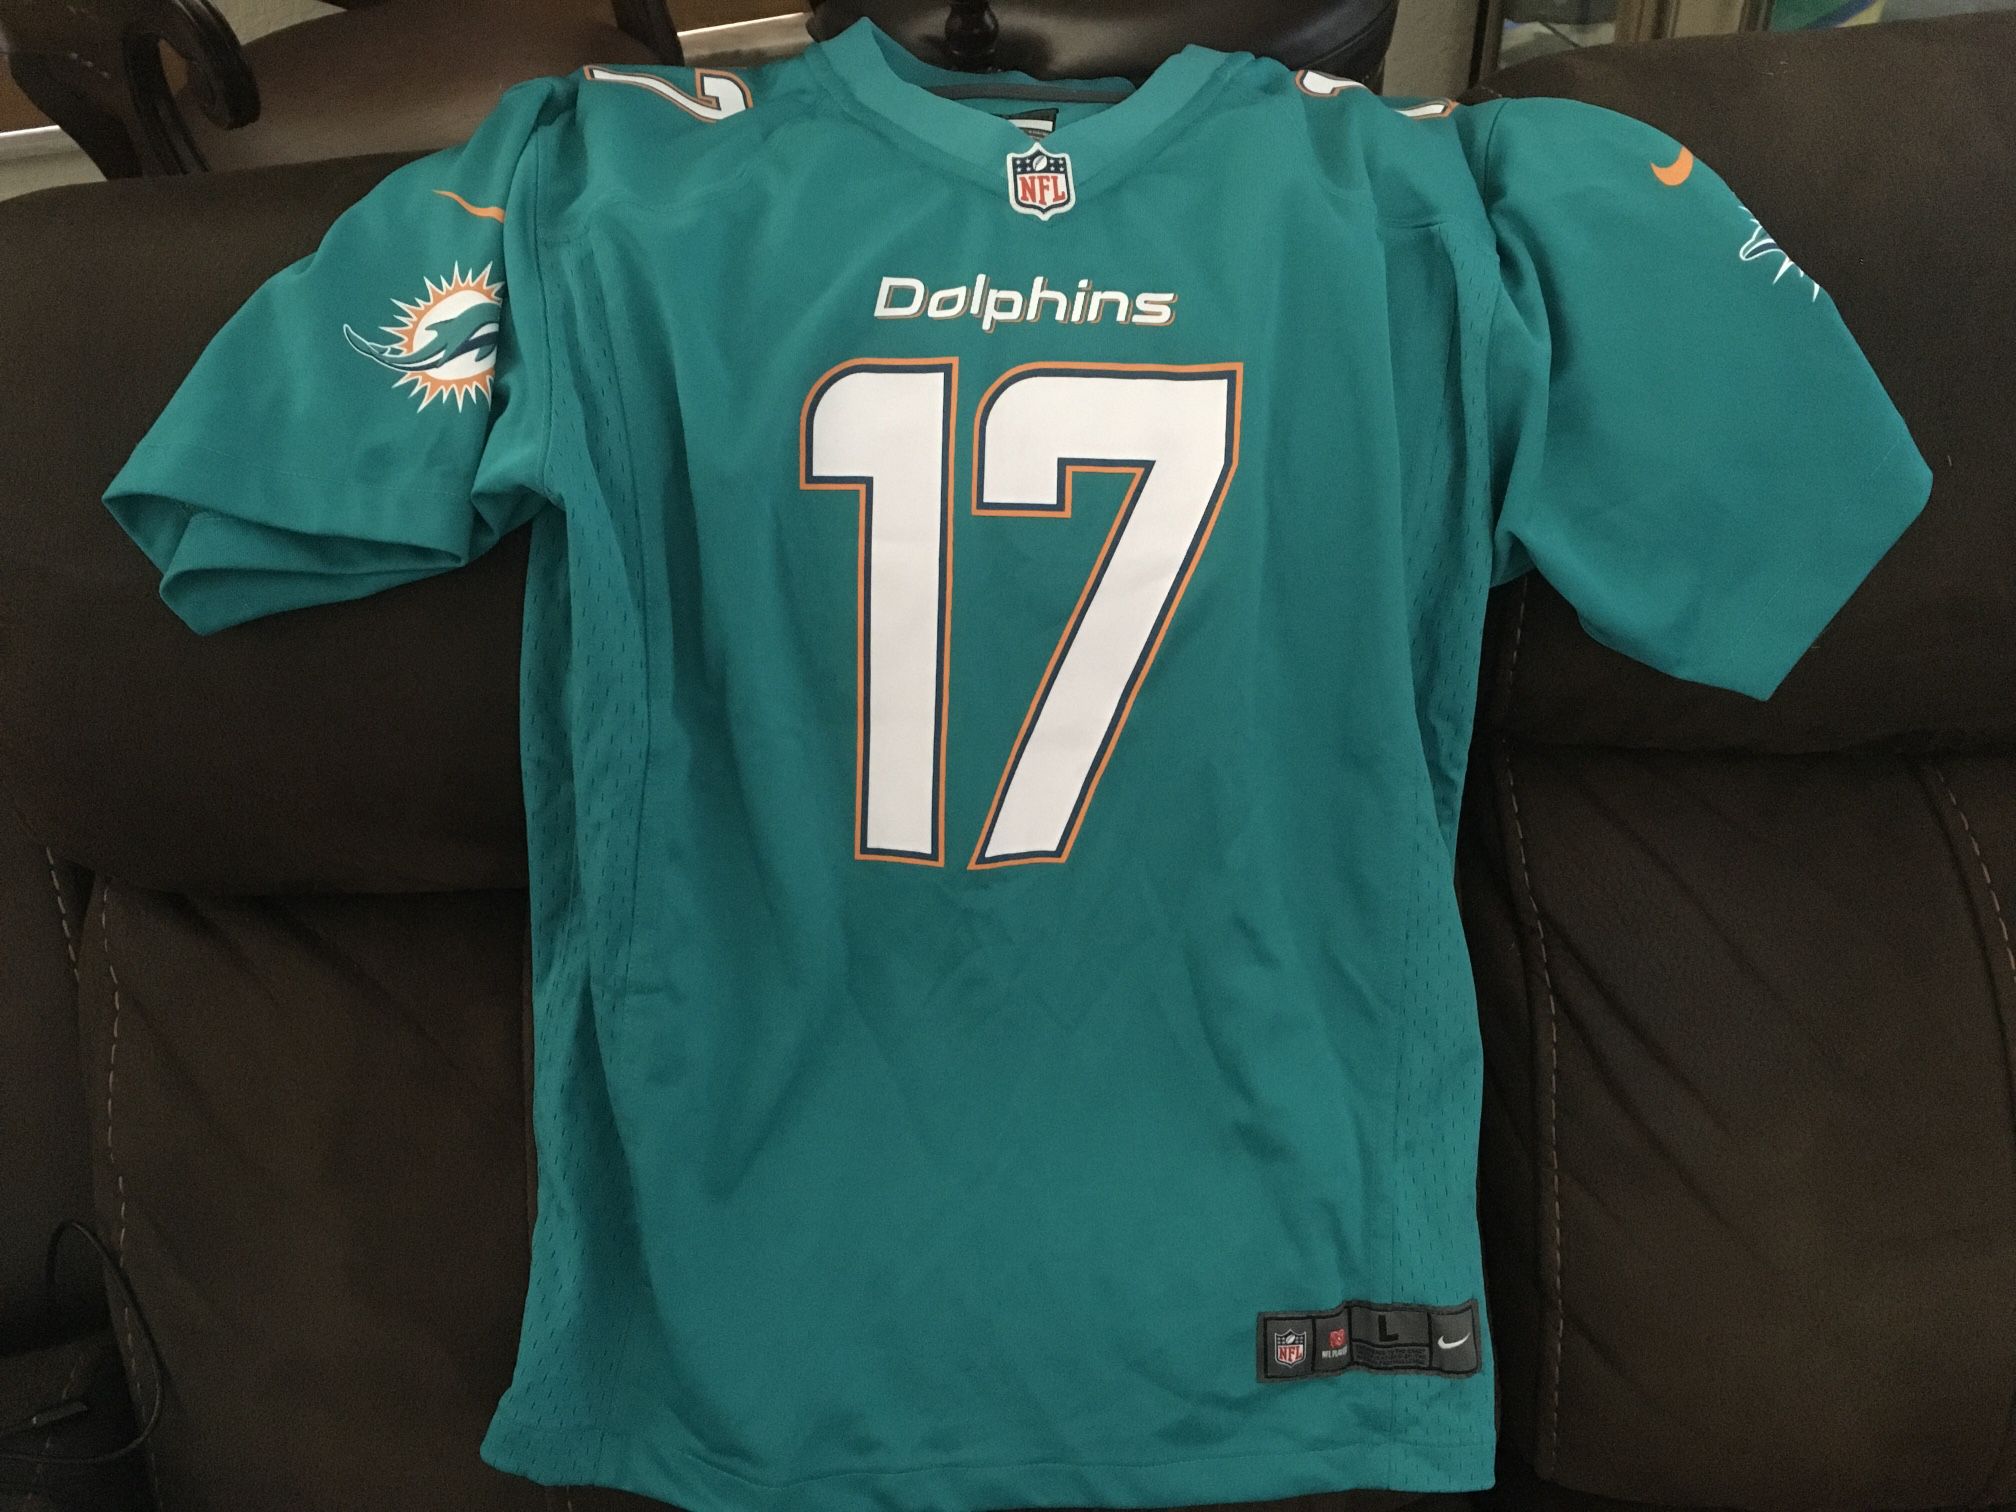 NFL Miami dolphins jersey for Sale in Pompano Beach, FL - OfferUp